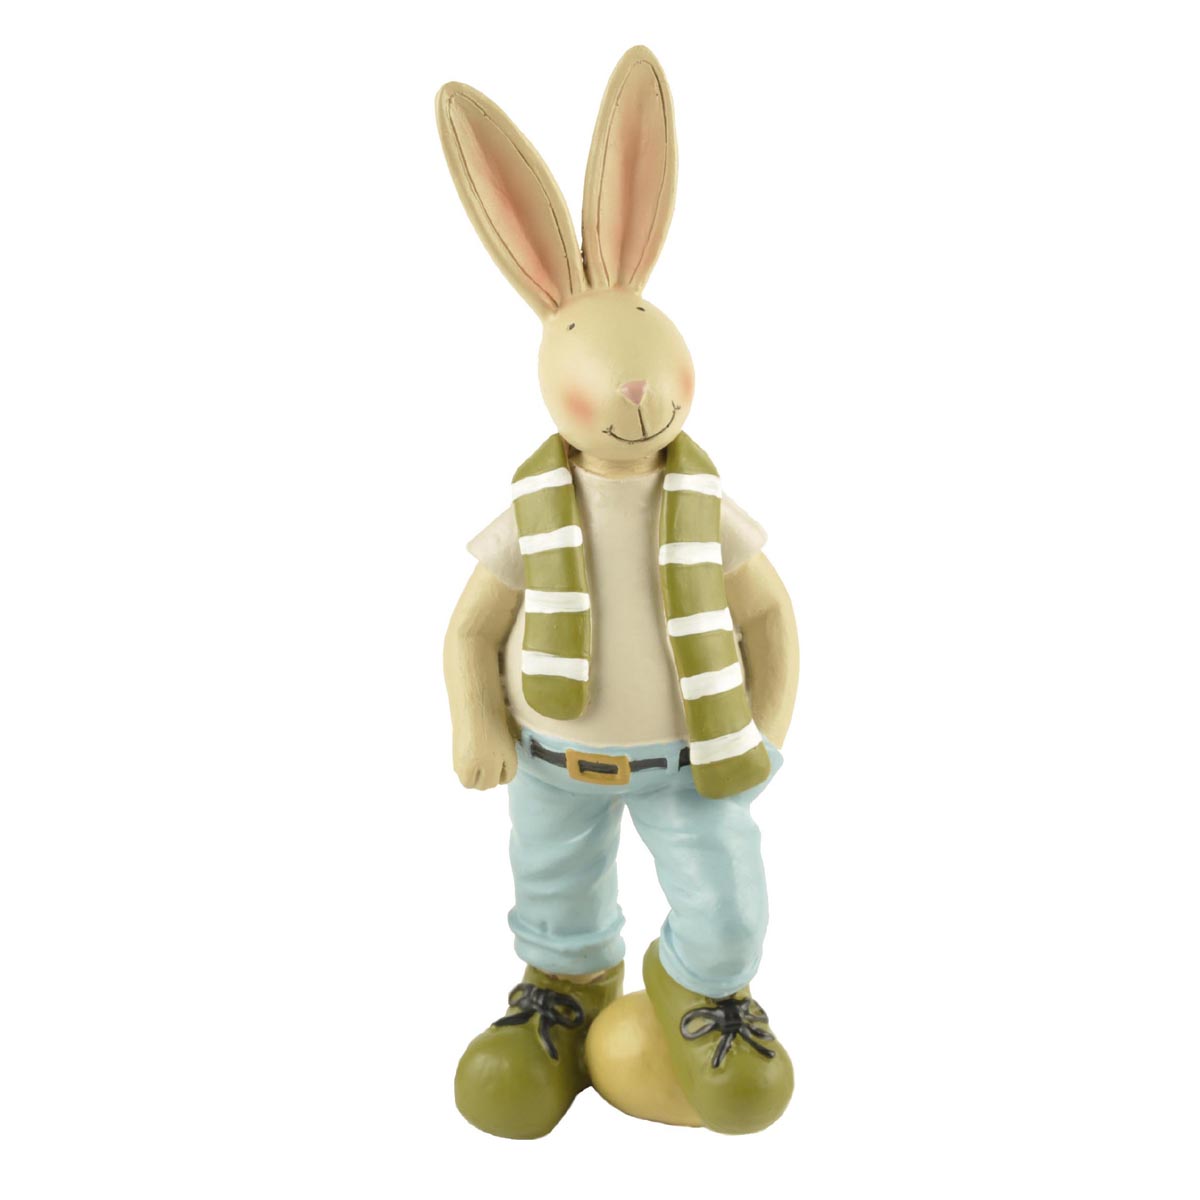 Ennas free sample easter figurines top brand for holiday gift